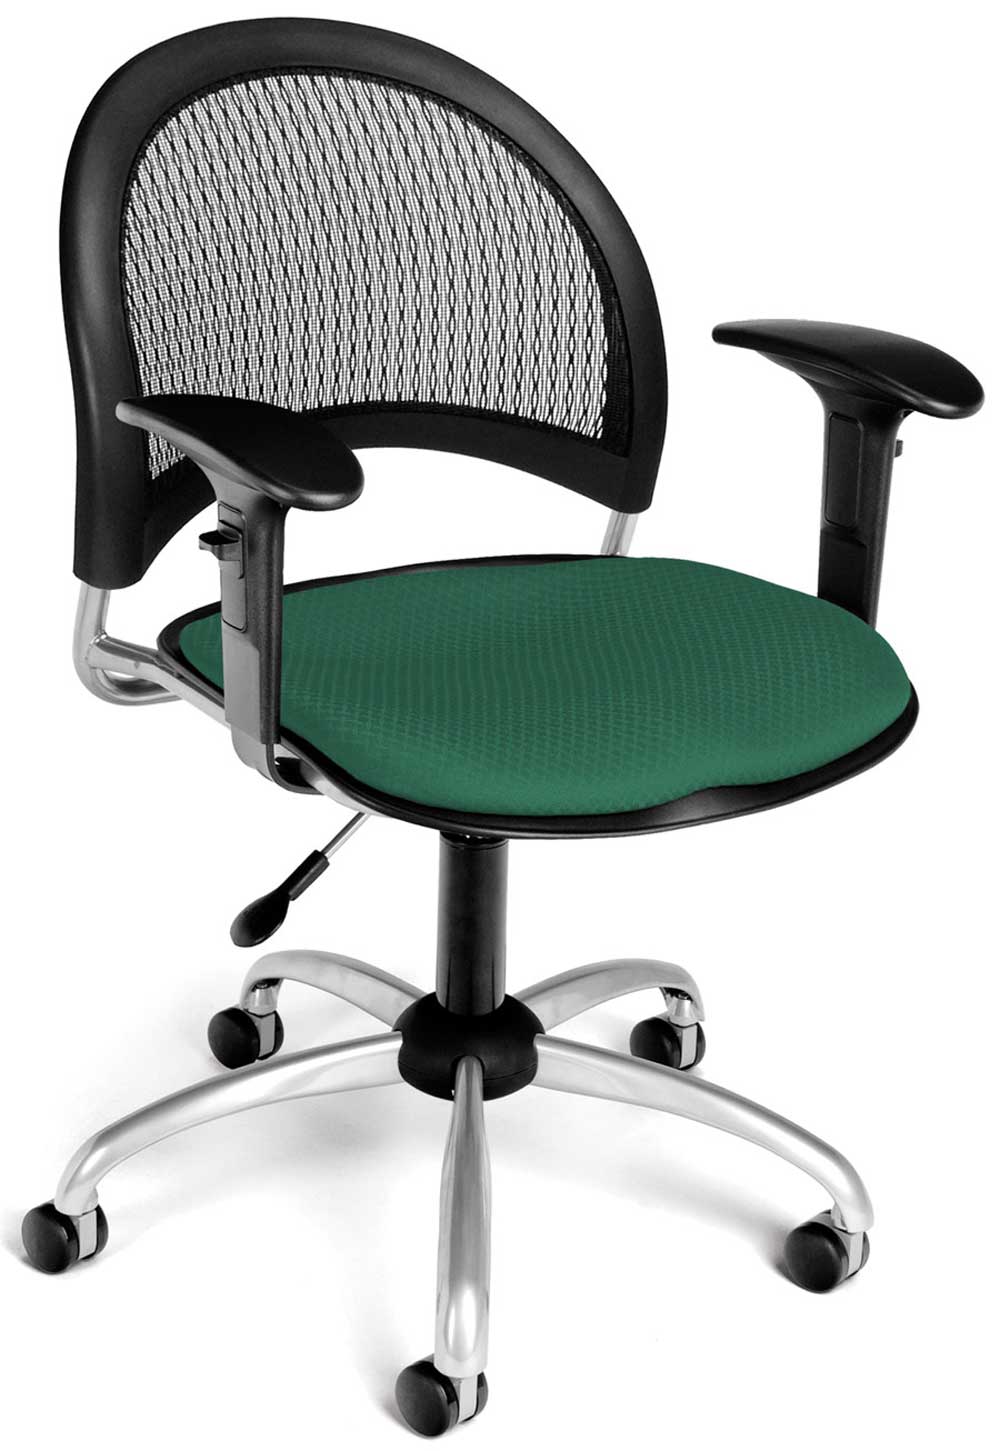 2. Ergonomic office chairs - Office Chair Back Supports